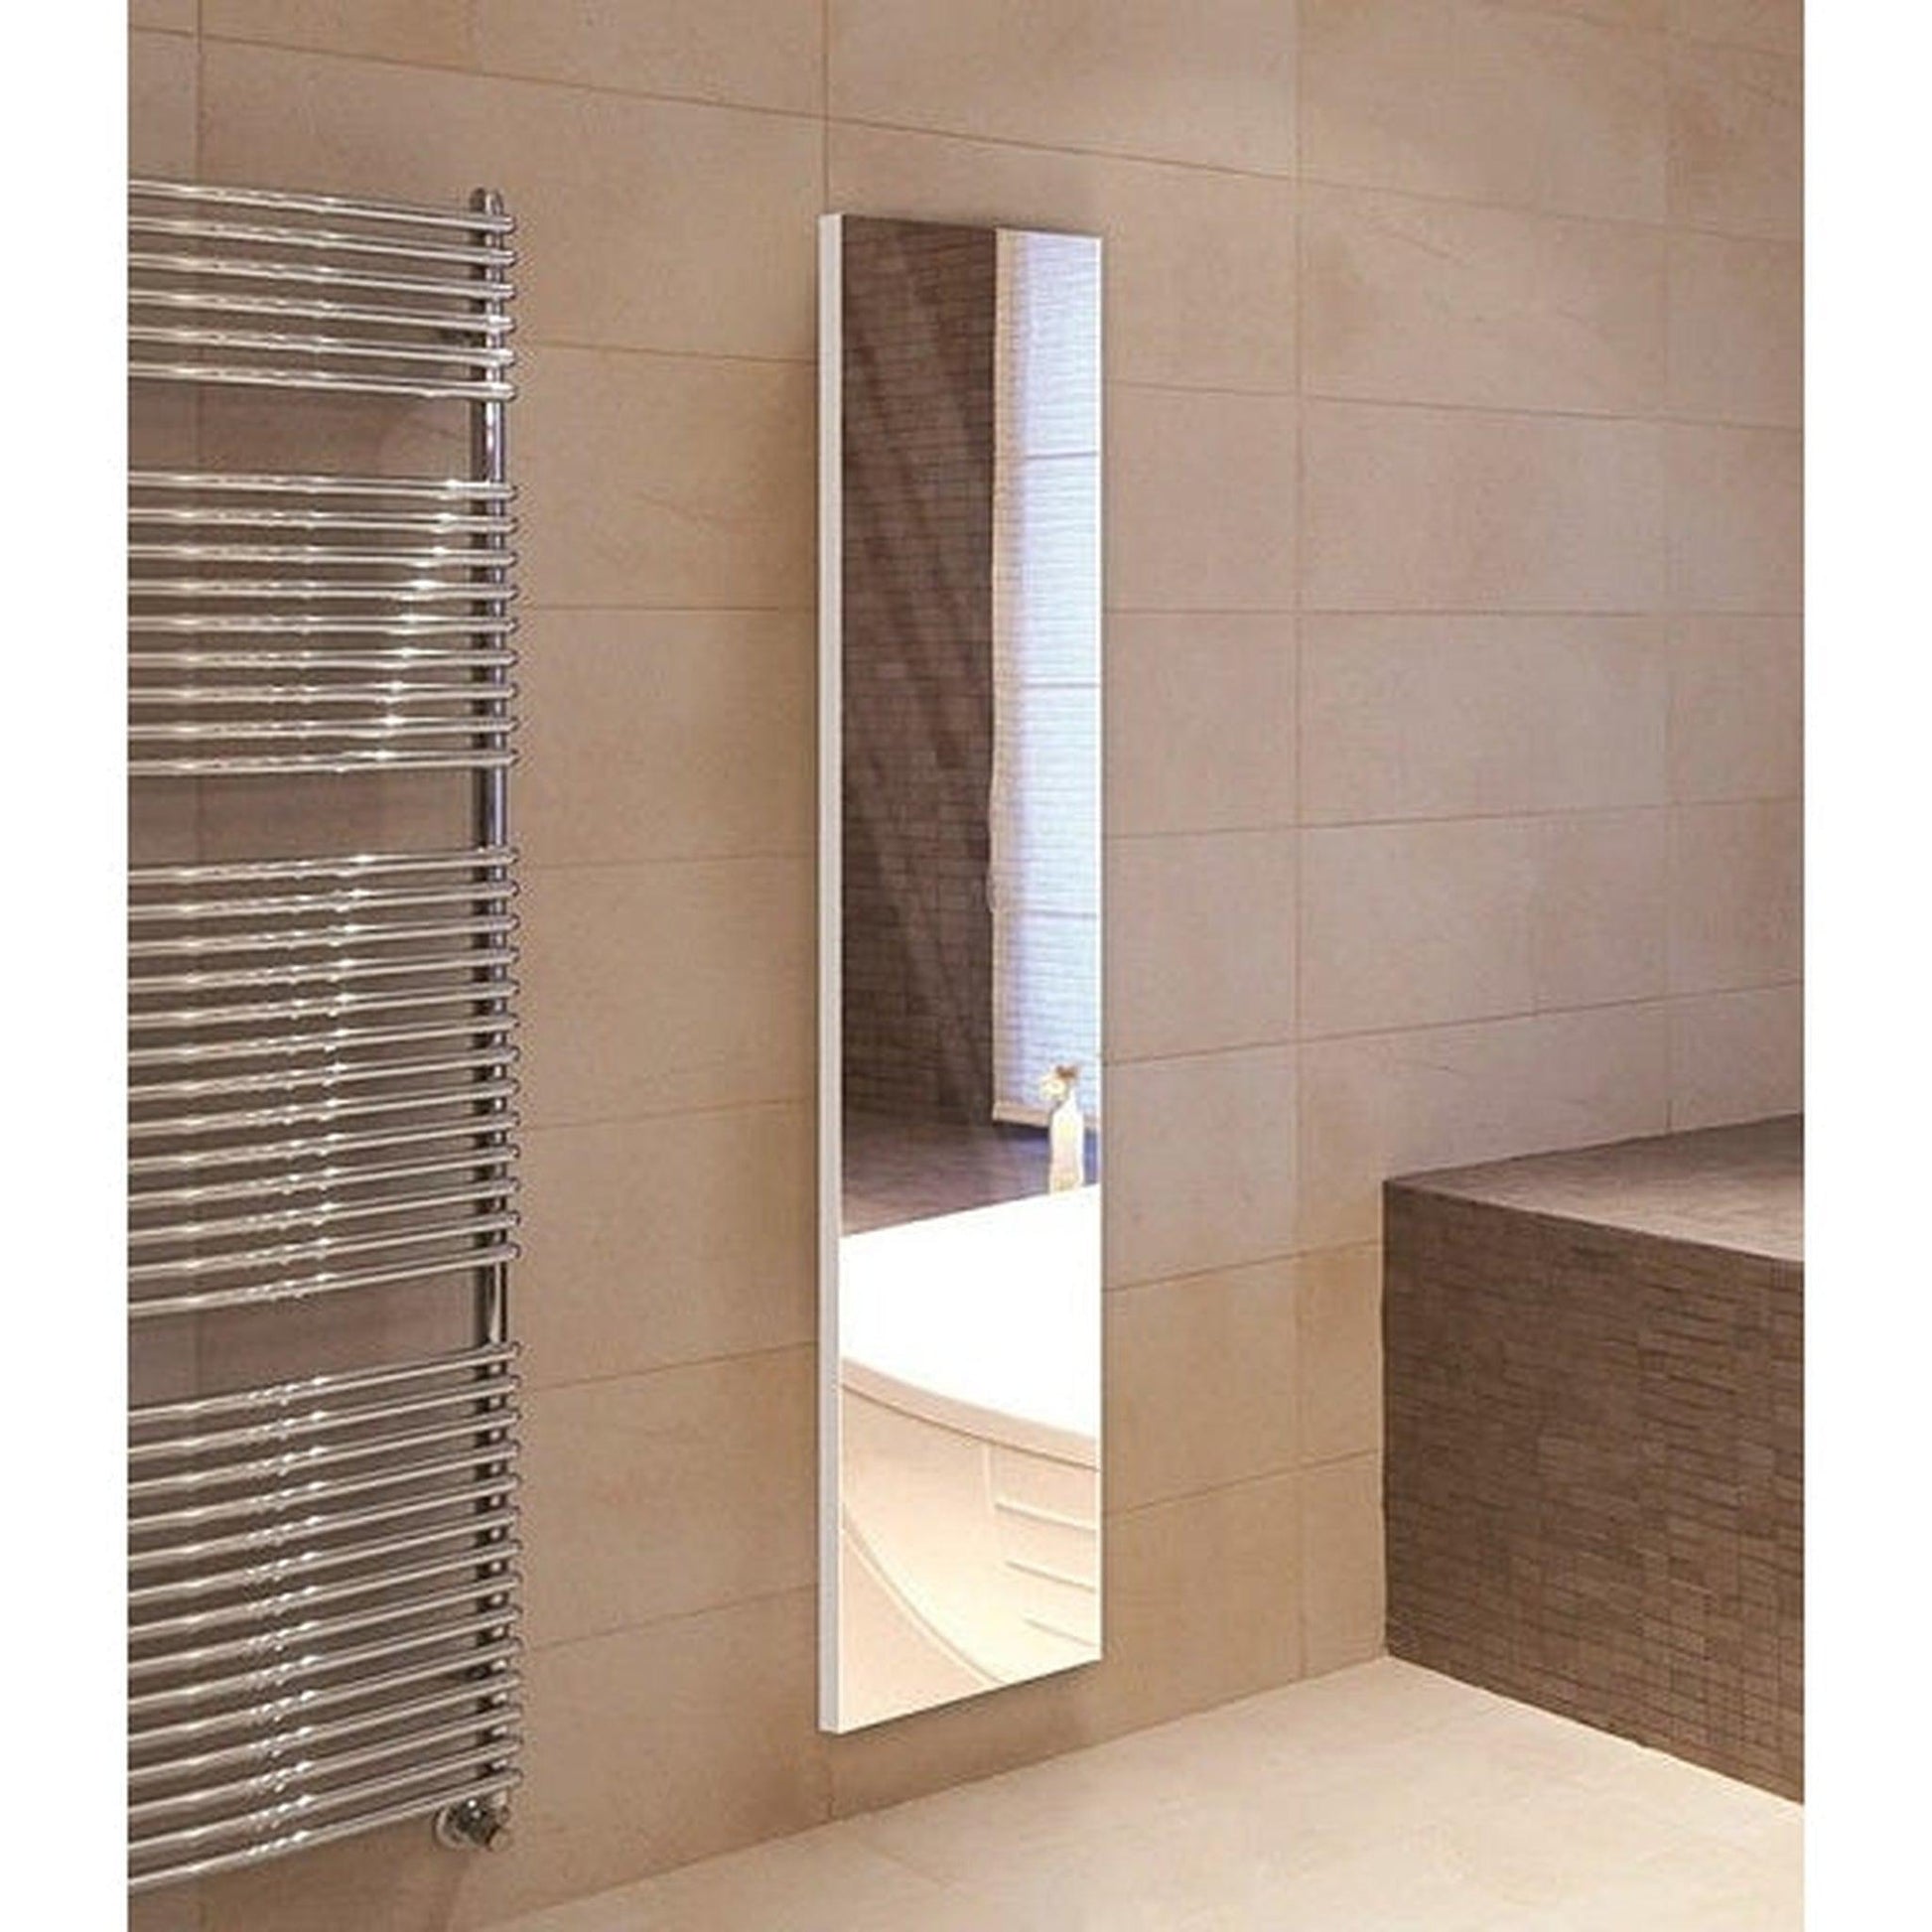 14 Inch X 4 Pieces Square Full Length Mirror Tiles Frameless Wall